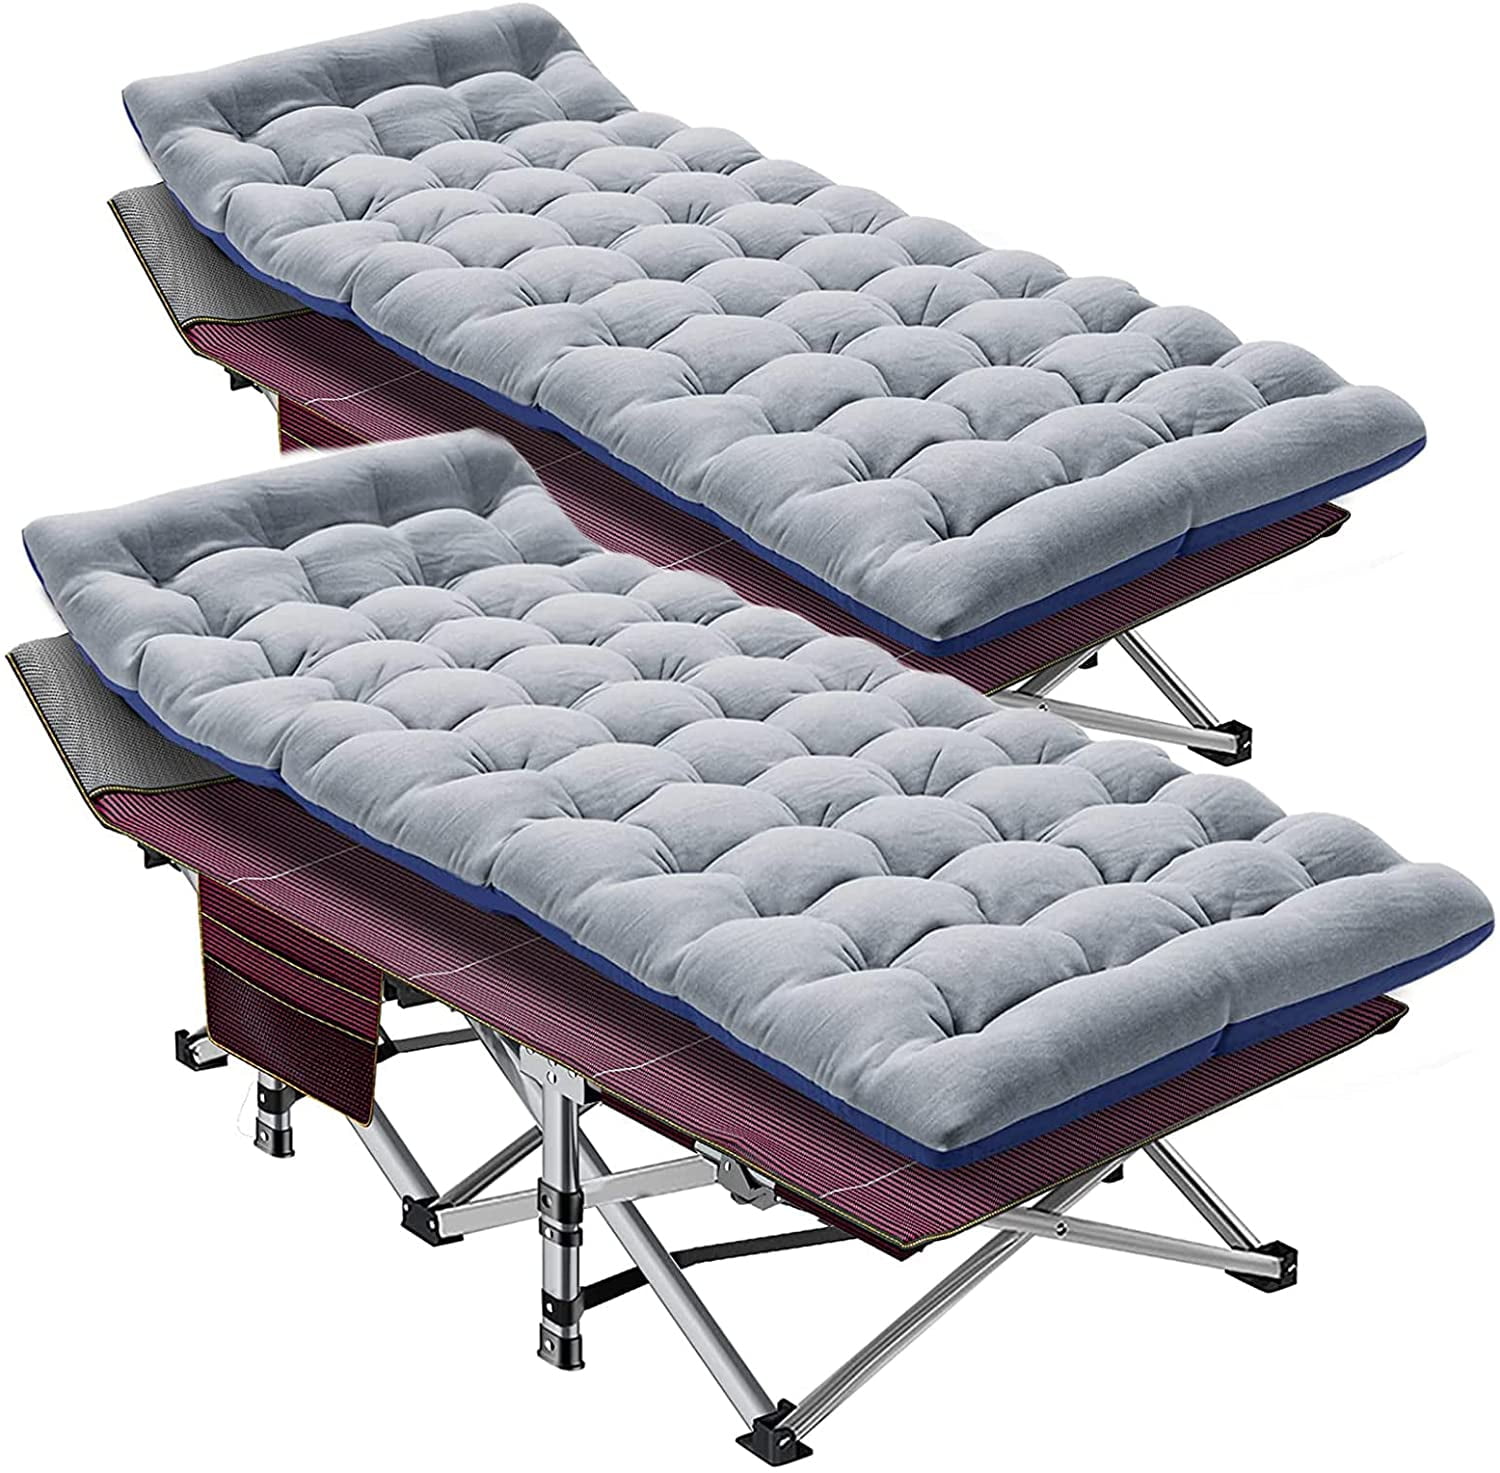 Slsy Folding Camping Cots for Adults 880lbs, 2 Pack 28" Extra Wide Sturdy Portable Sleeping Cot, Folding Cot with Comfortable Mattress & Carry Bag